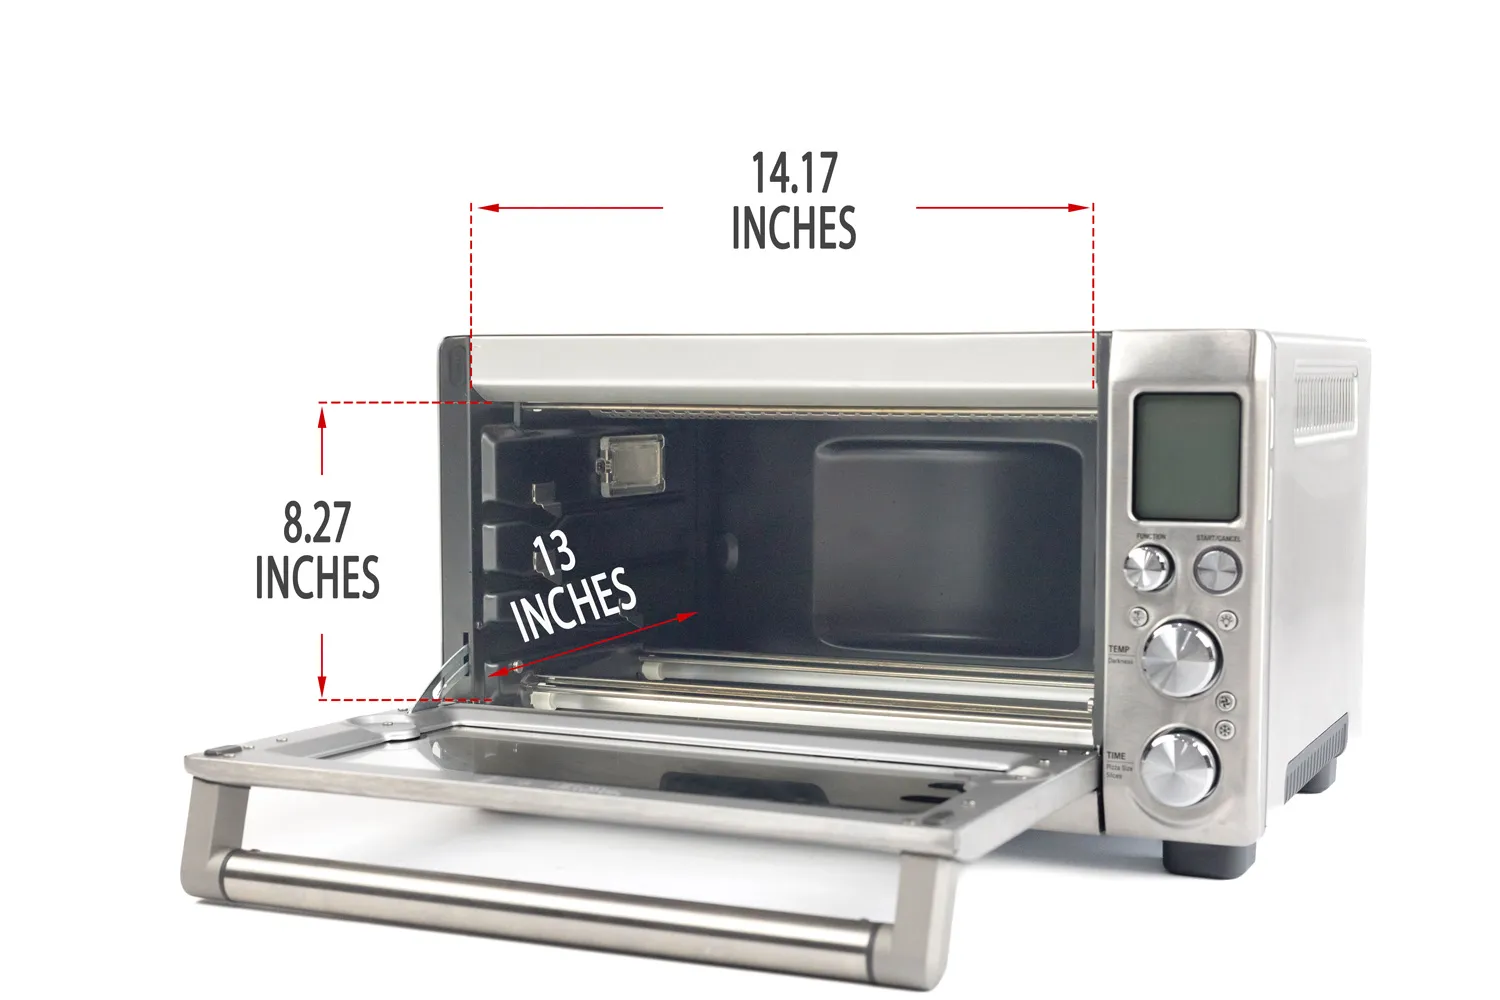 Breville Smart Oven review: Not connected, but still smartly